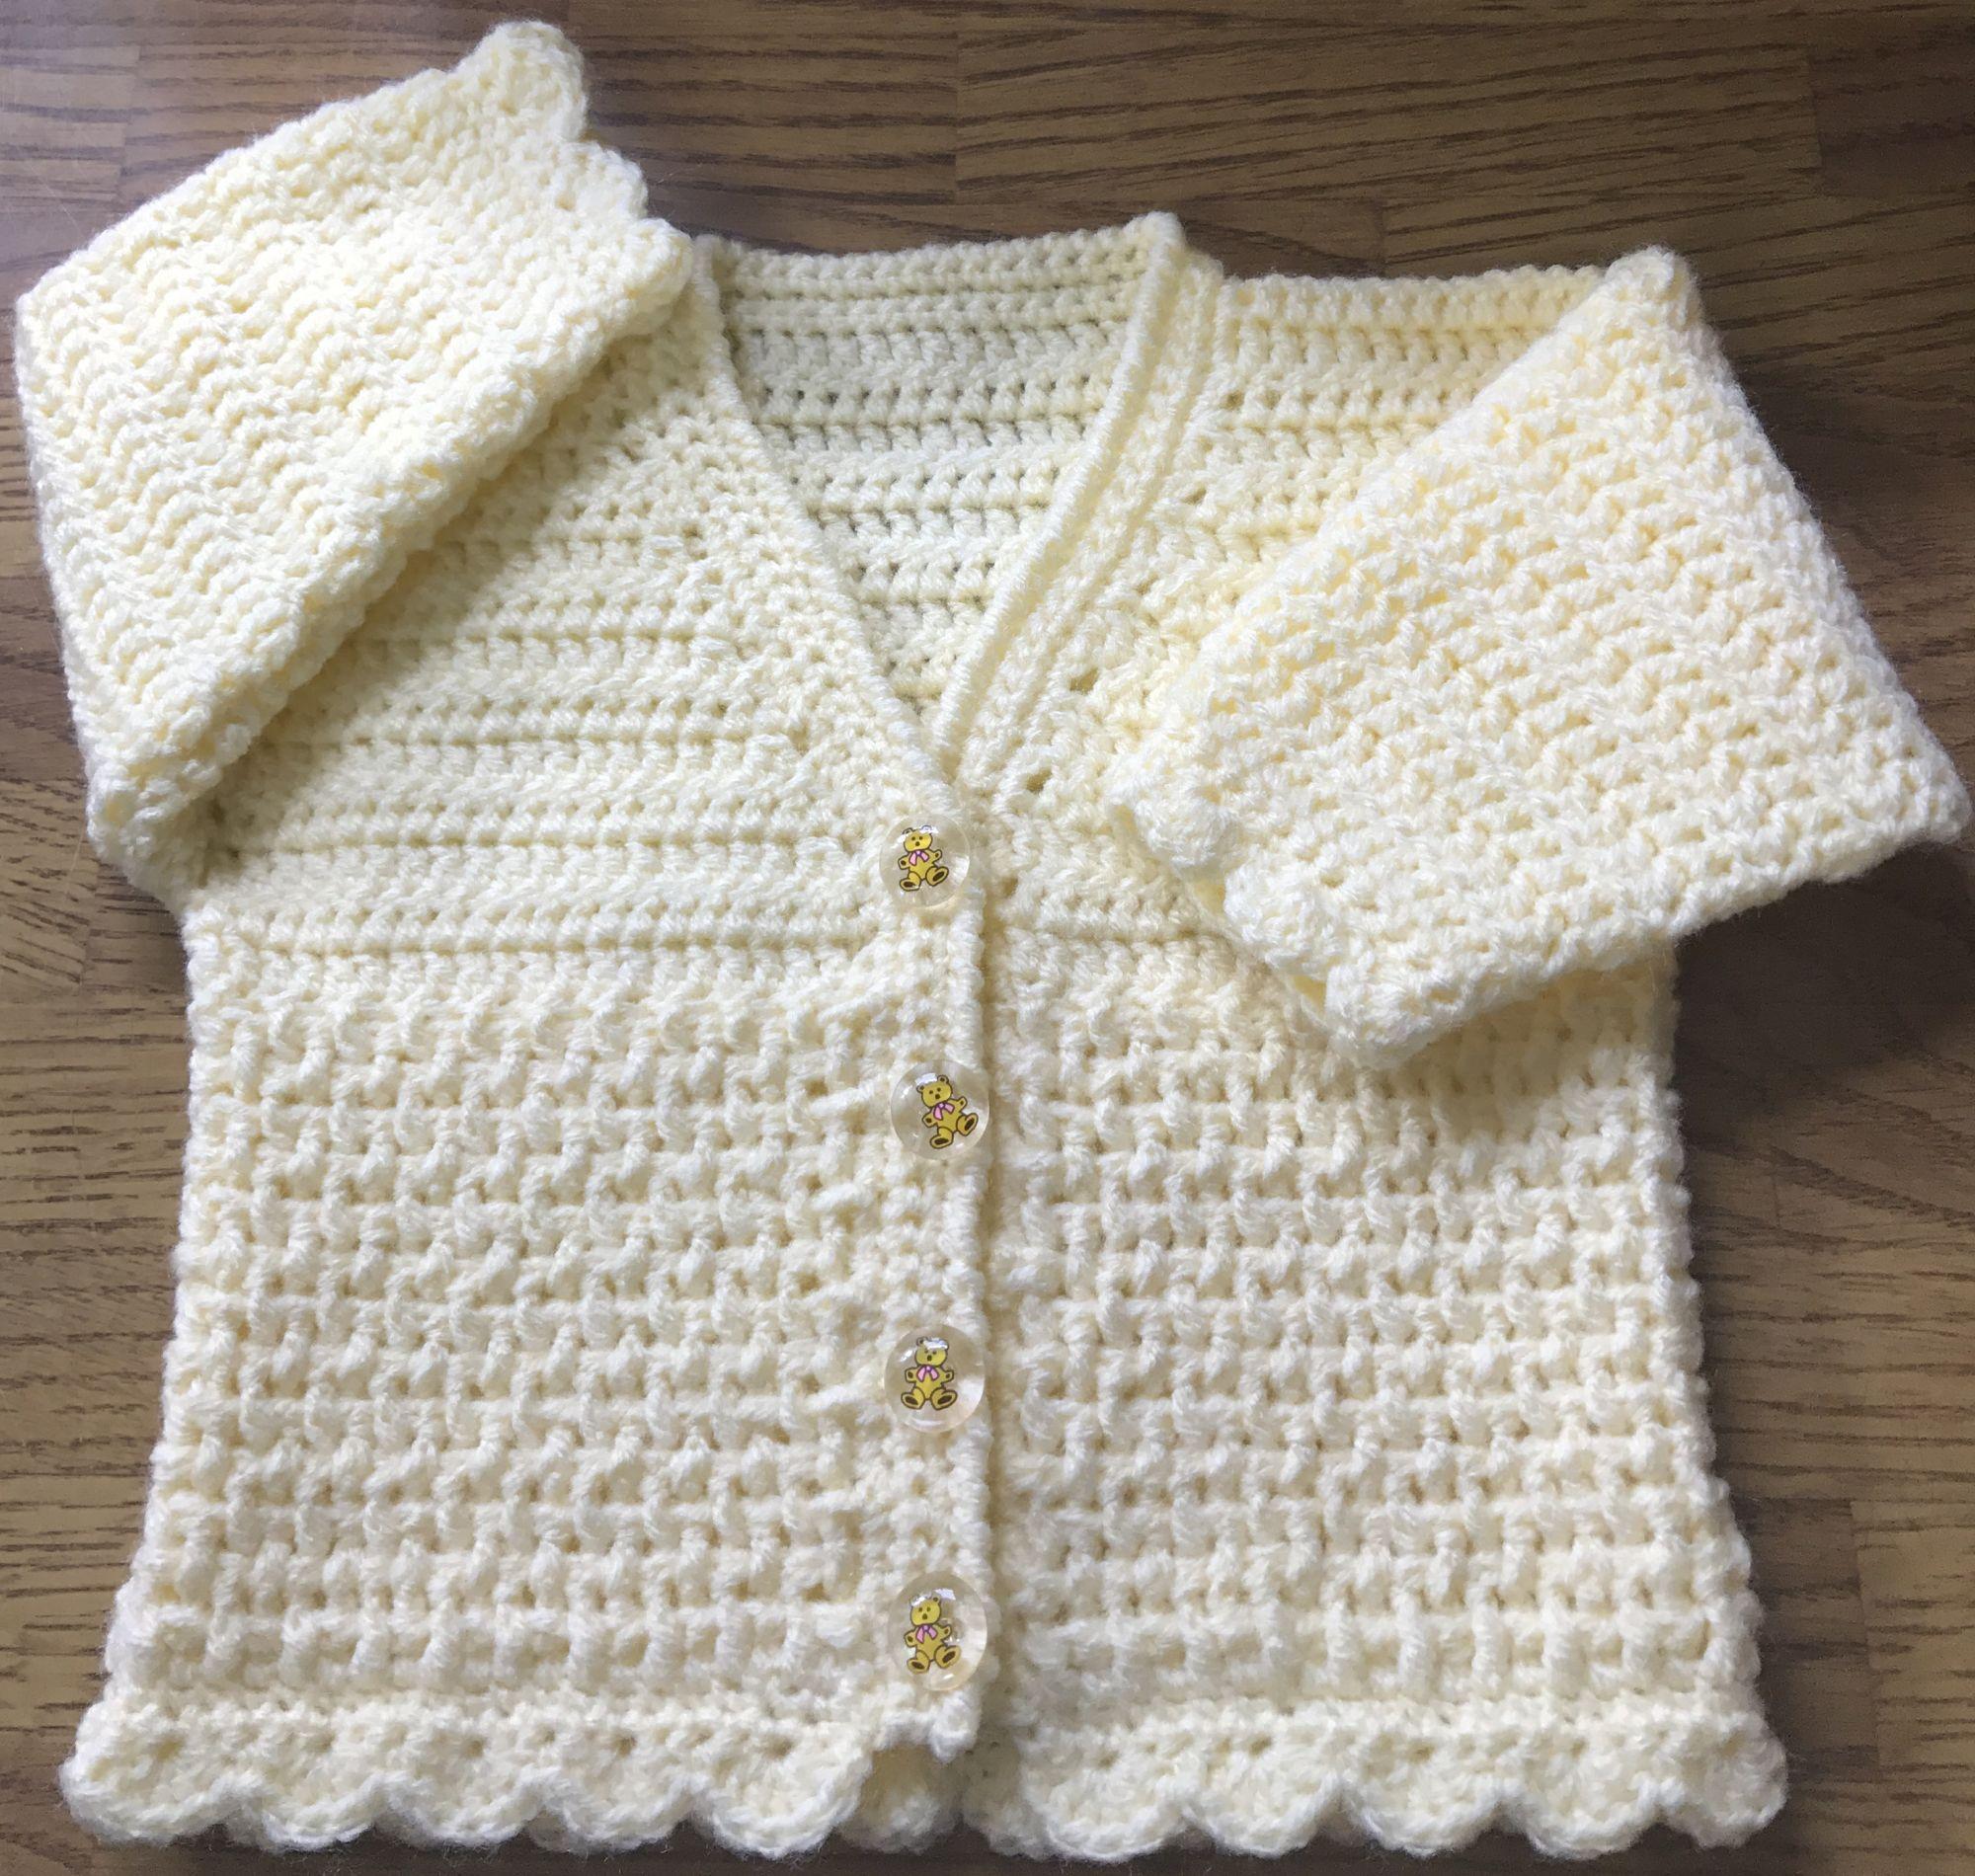 Birth to 2 years 1039 Baby Crochet Pattern for a Shaped Edge Cardigan in DK 